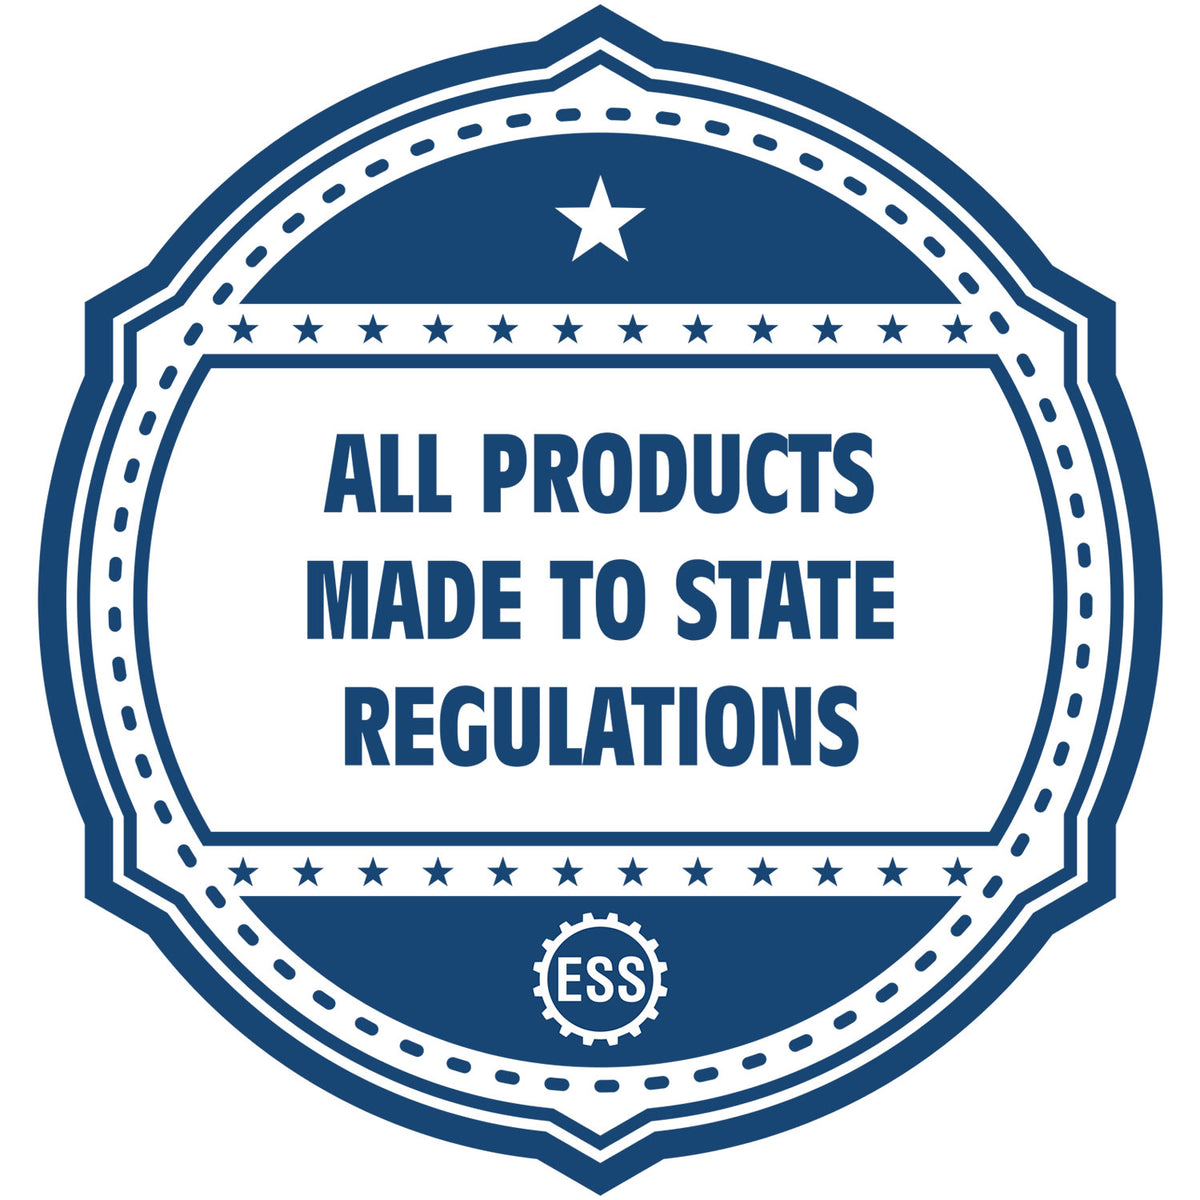 A blue icon or badge for the Gift Maine Landscape Architect Seal showing that this product is made in compliance with state regulations.